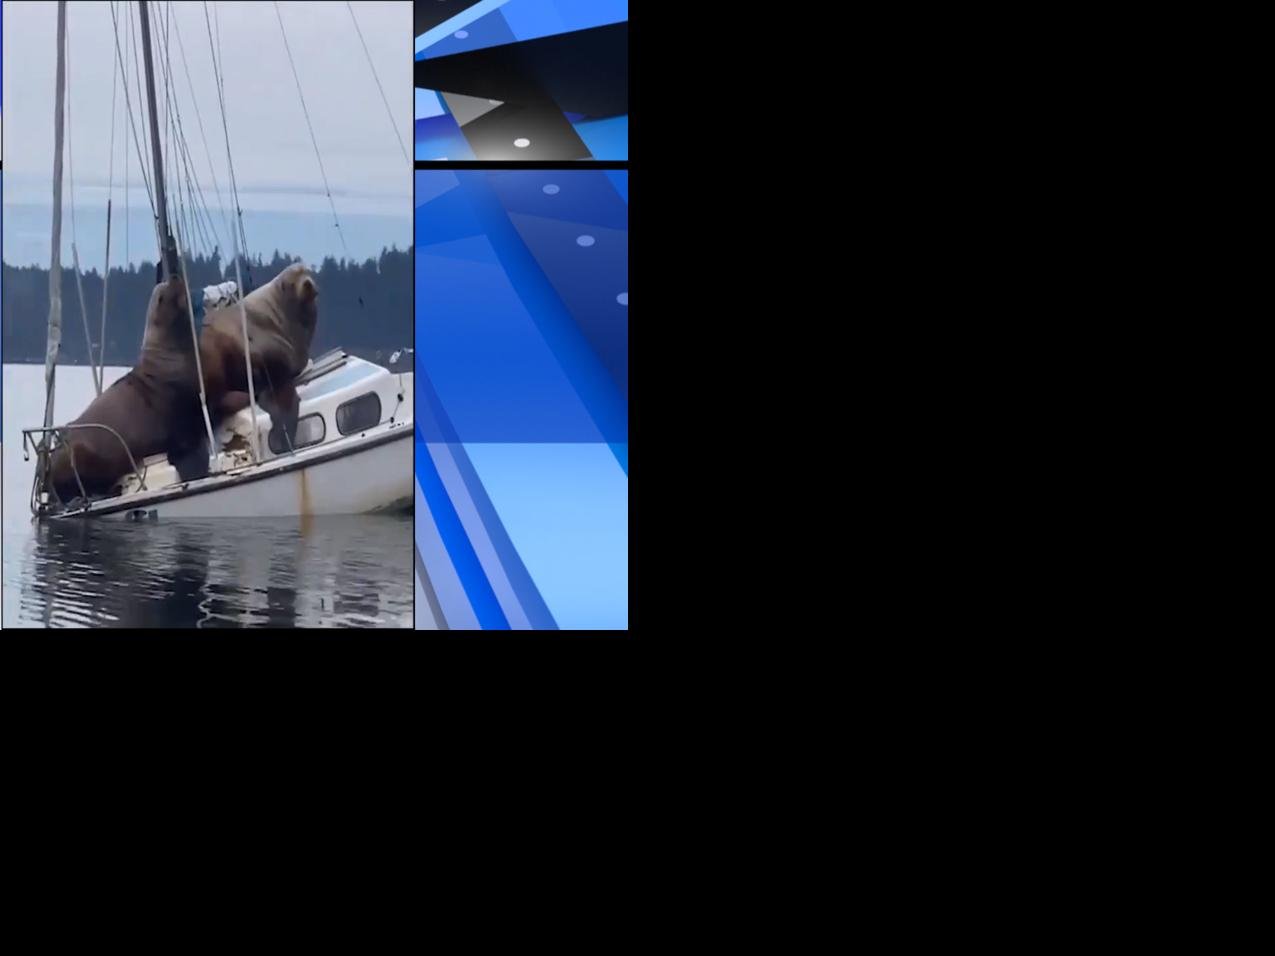 Gonzaga alum captures viral video of massive sea lions lounging on boat